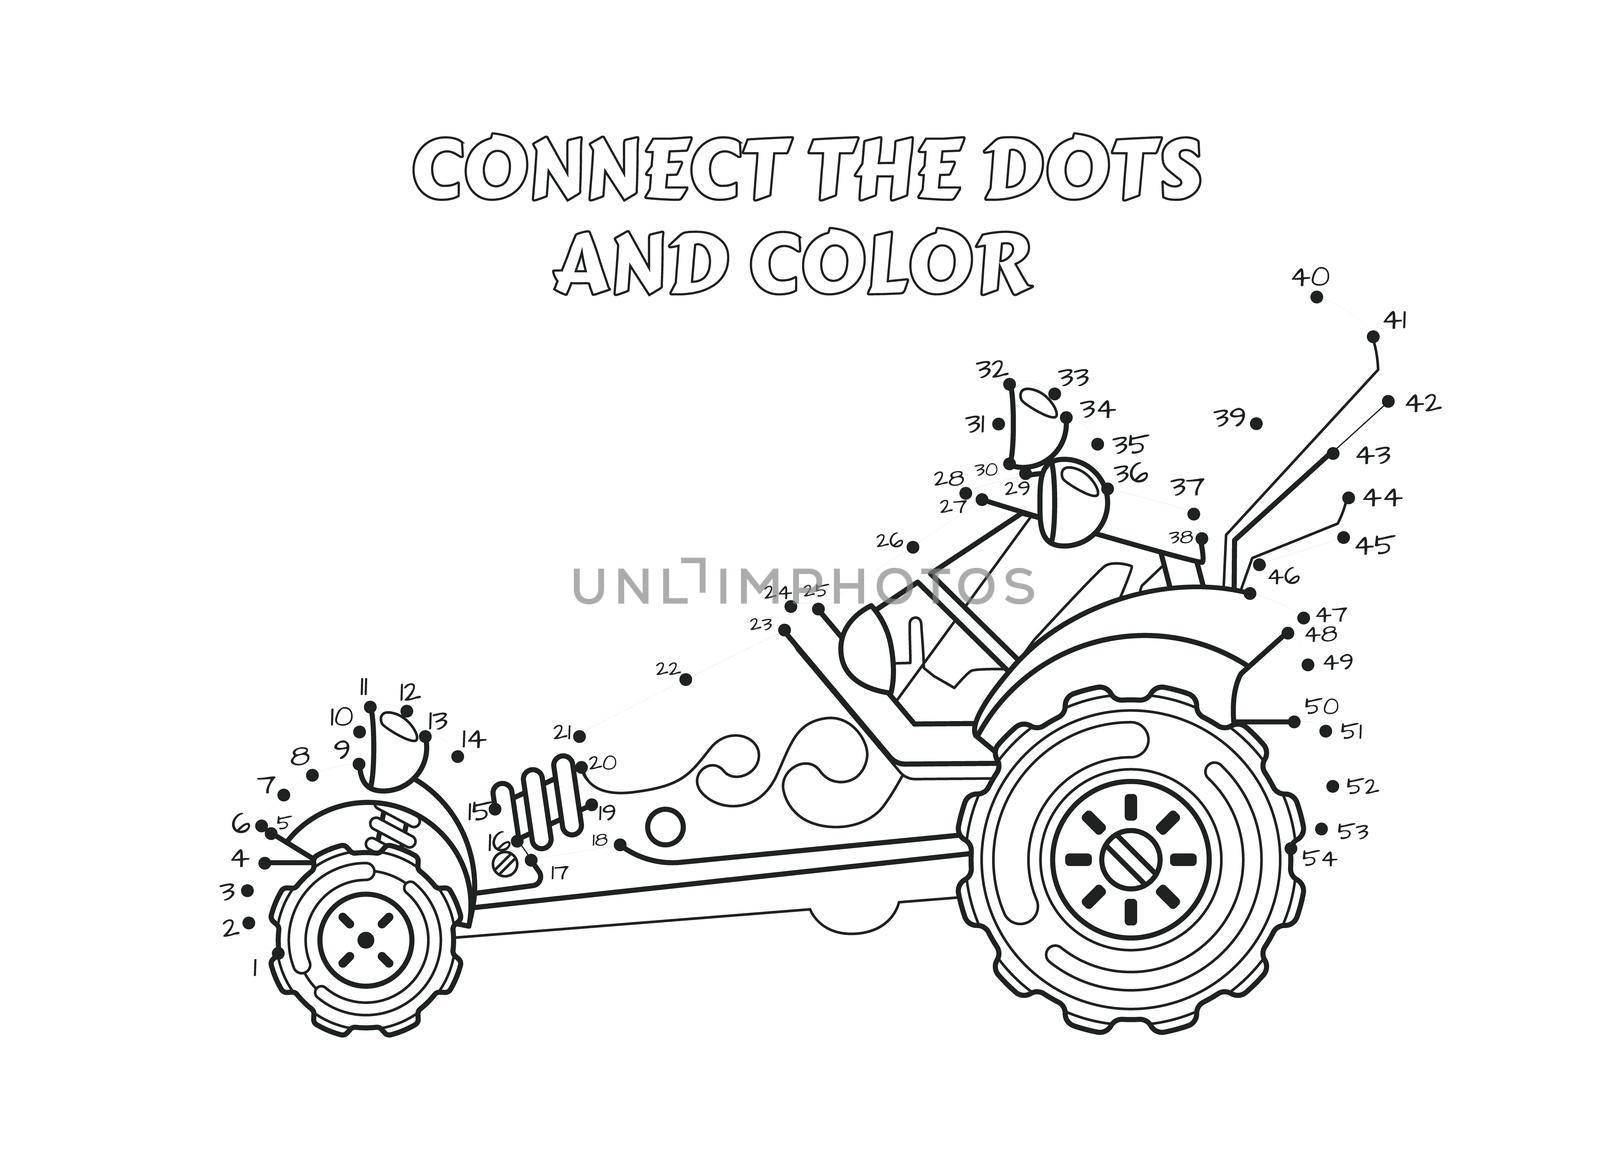 Numbers game, educational connect the dots game for children, Dune Buggy.